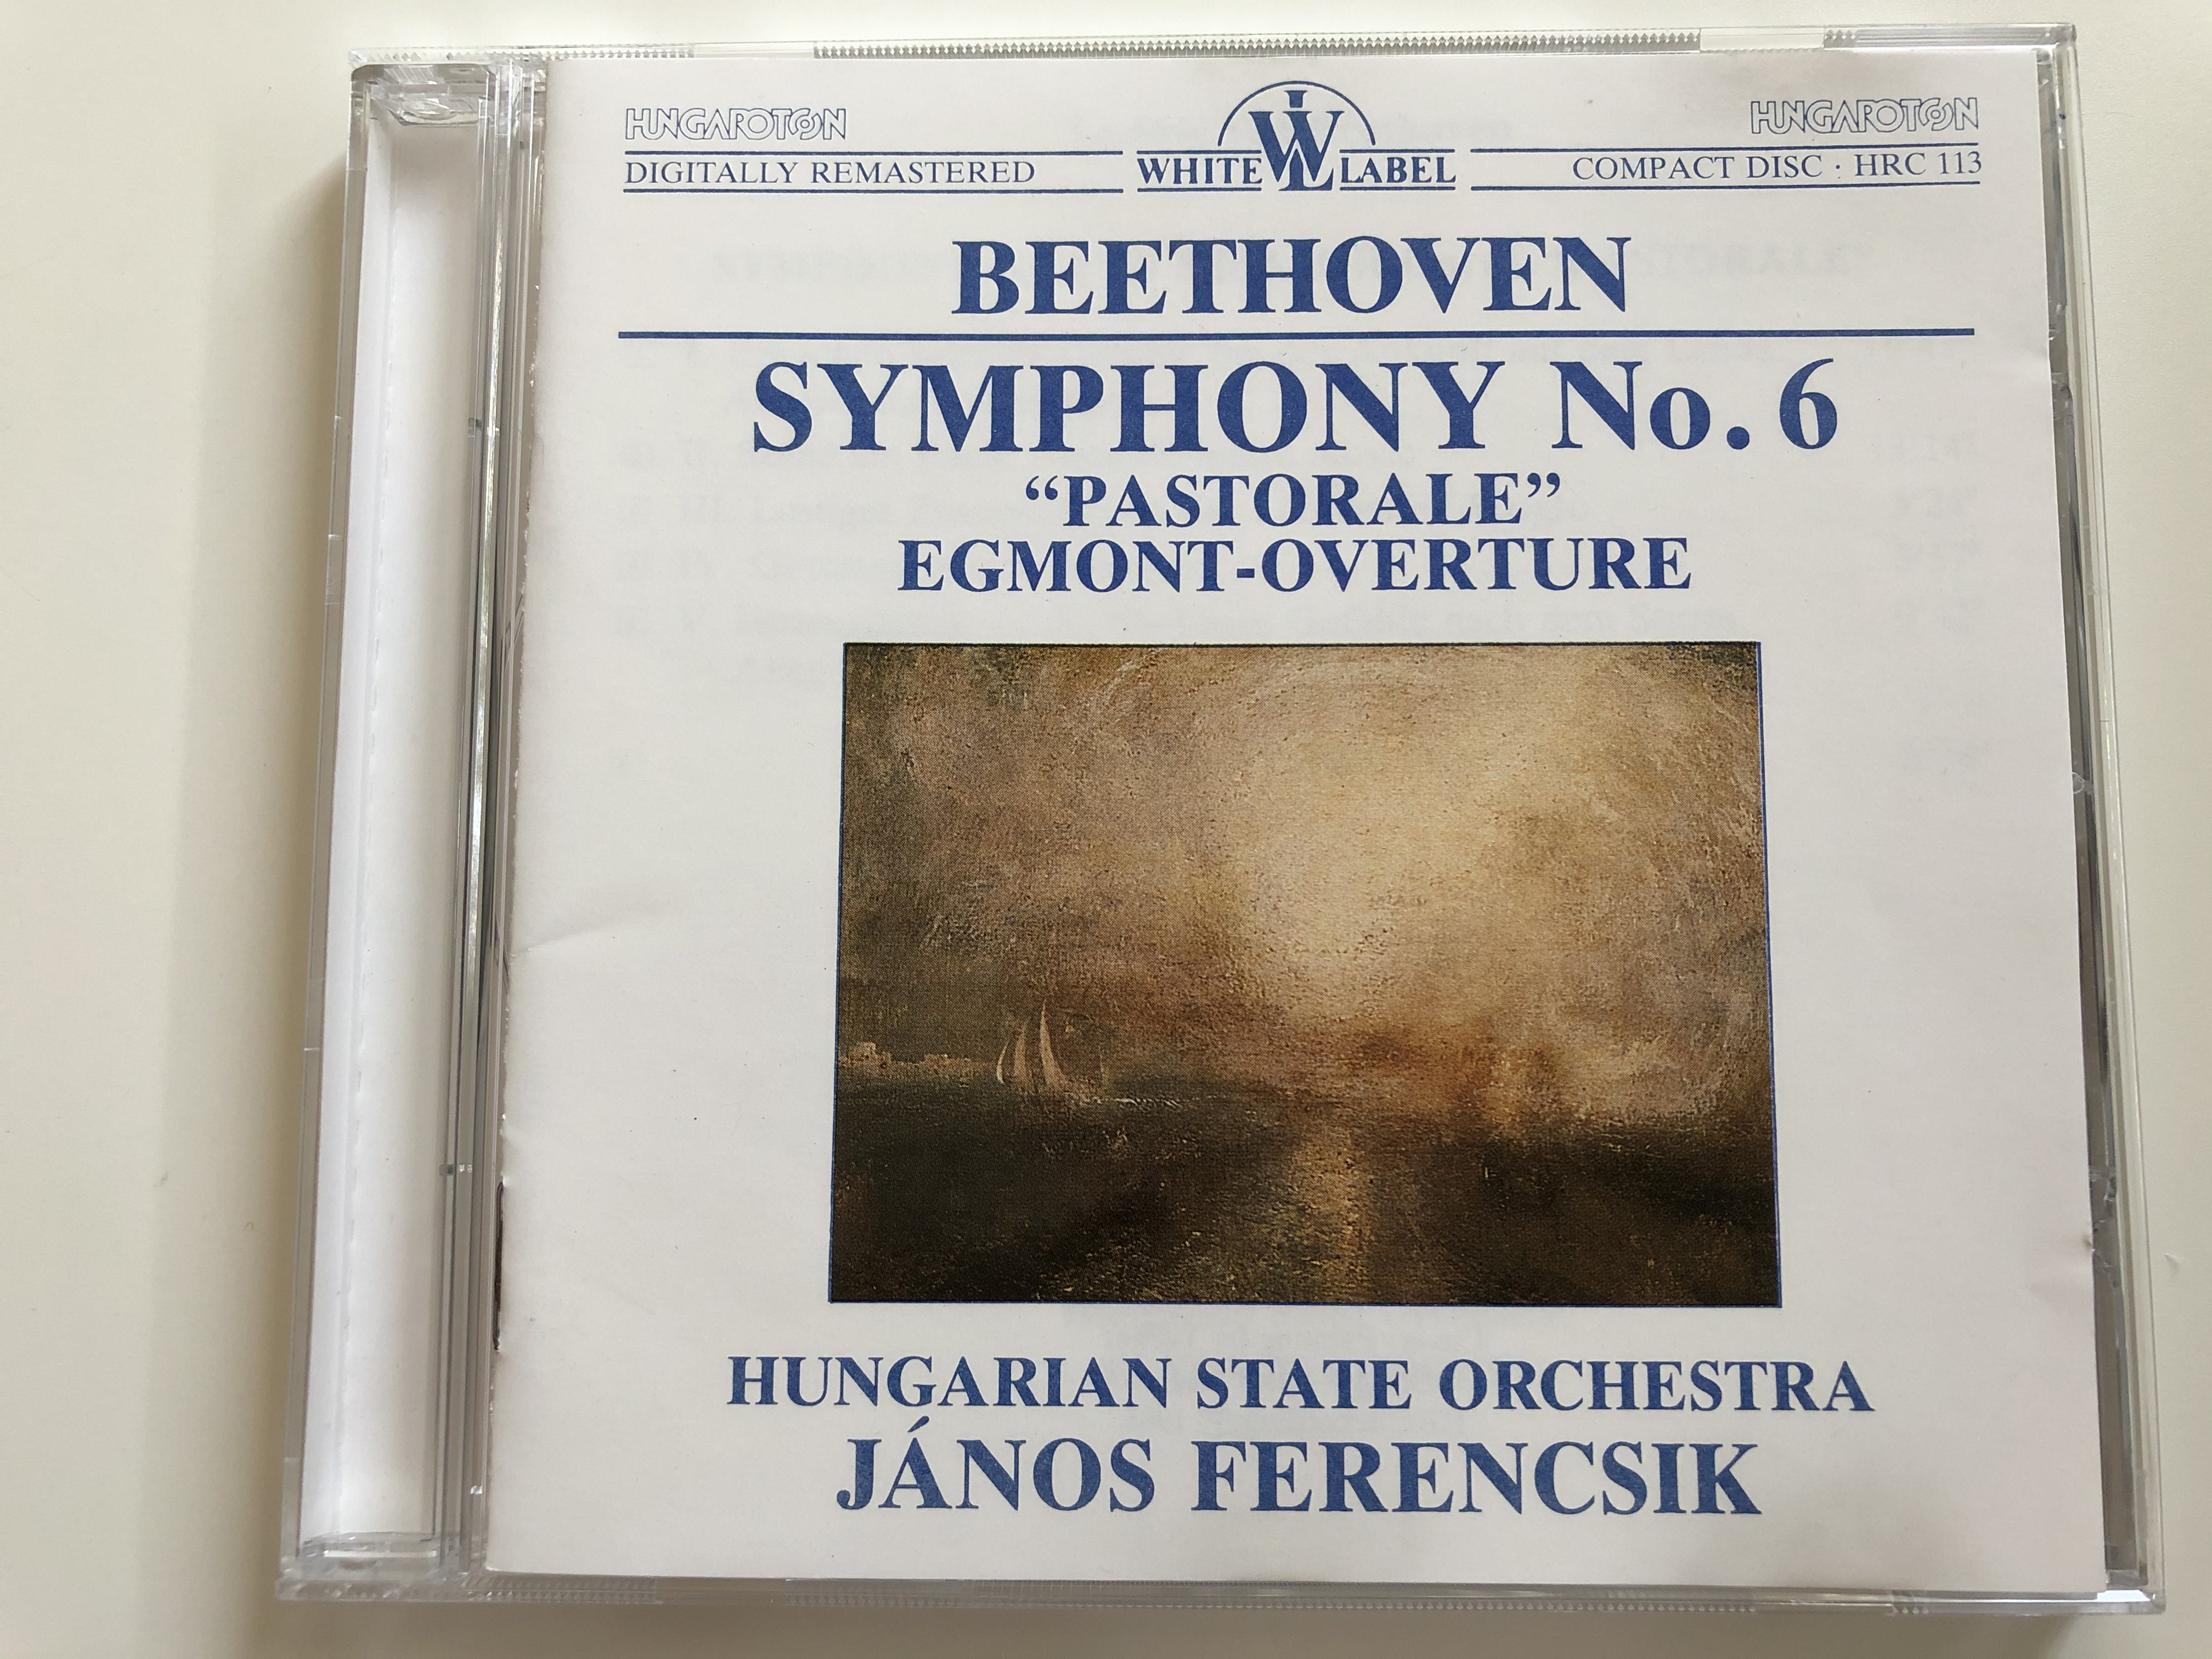 beethoven-symphony-no.-6-pastorale-egmont-overture-hungarian-state-orchestra-j-nos-ferencsik-white-label-audio-cd-1988-stereo-hrc-113-1-.jpg